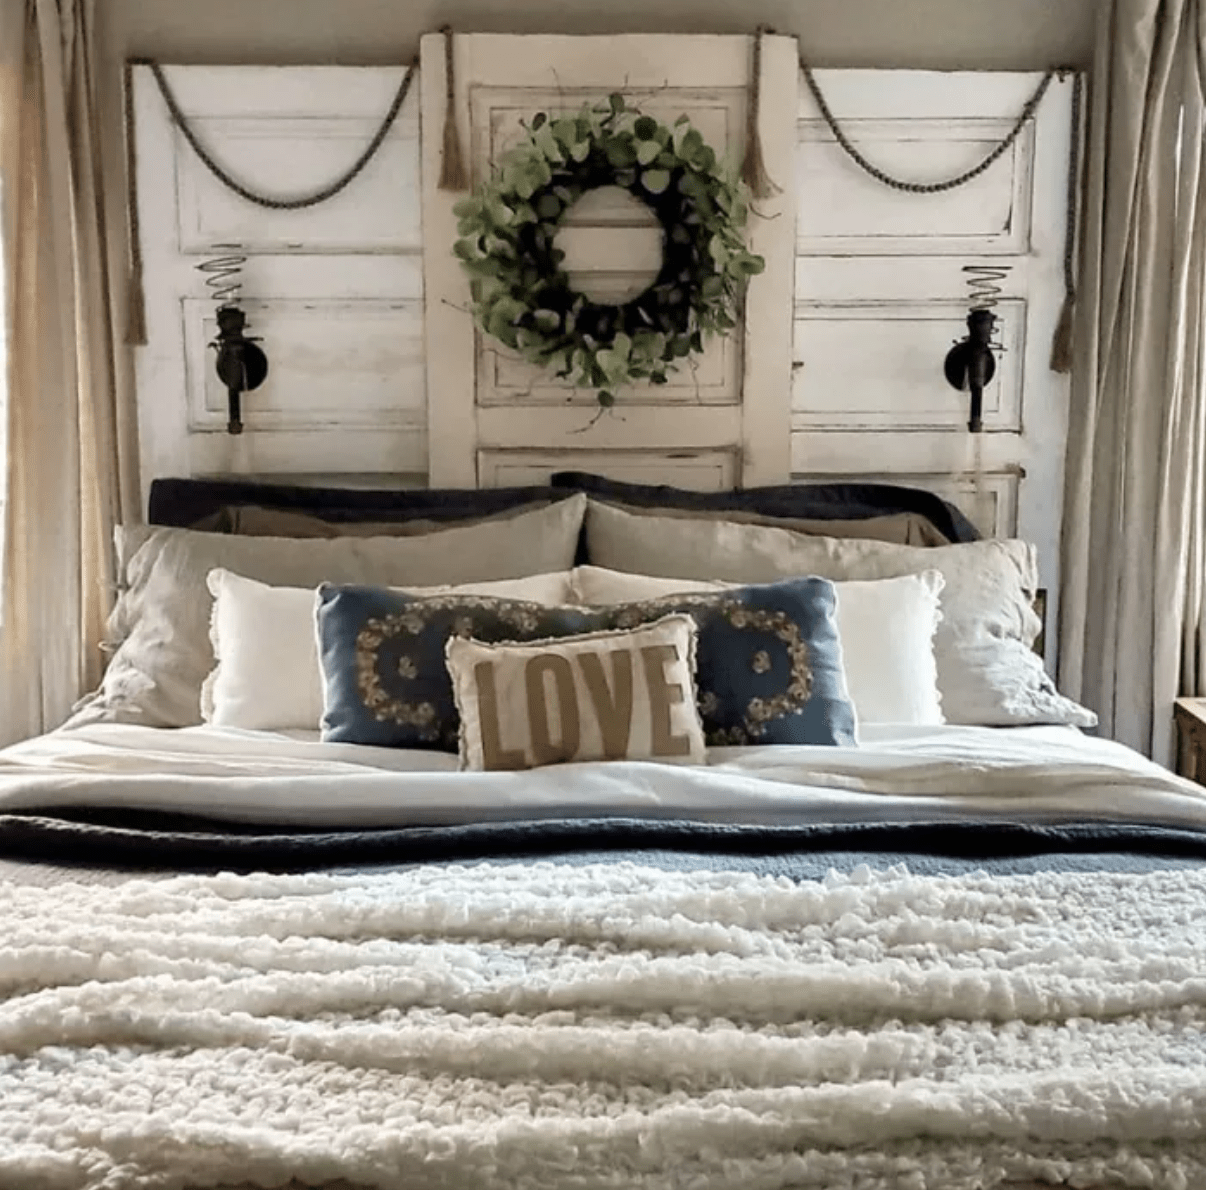 three old vintage doors are used as a bed headboard with a wreath hanging in the middle spiral wall sconces are hanging on the side love pillow fluffy fur throw